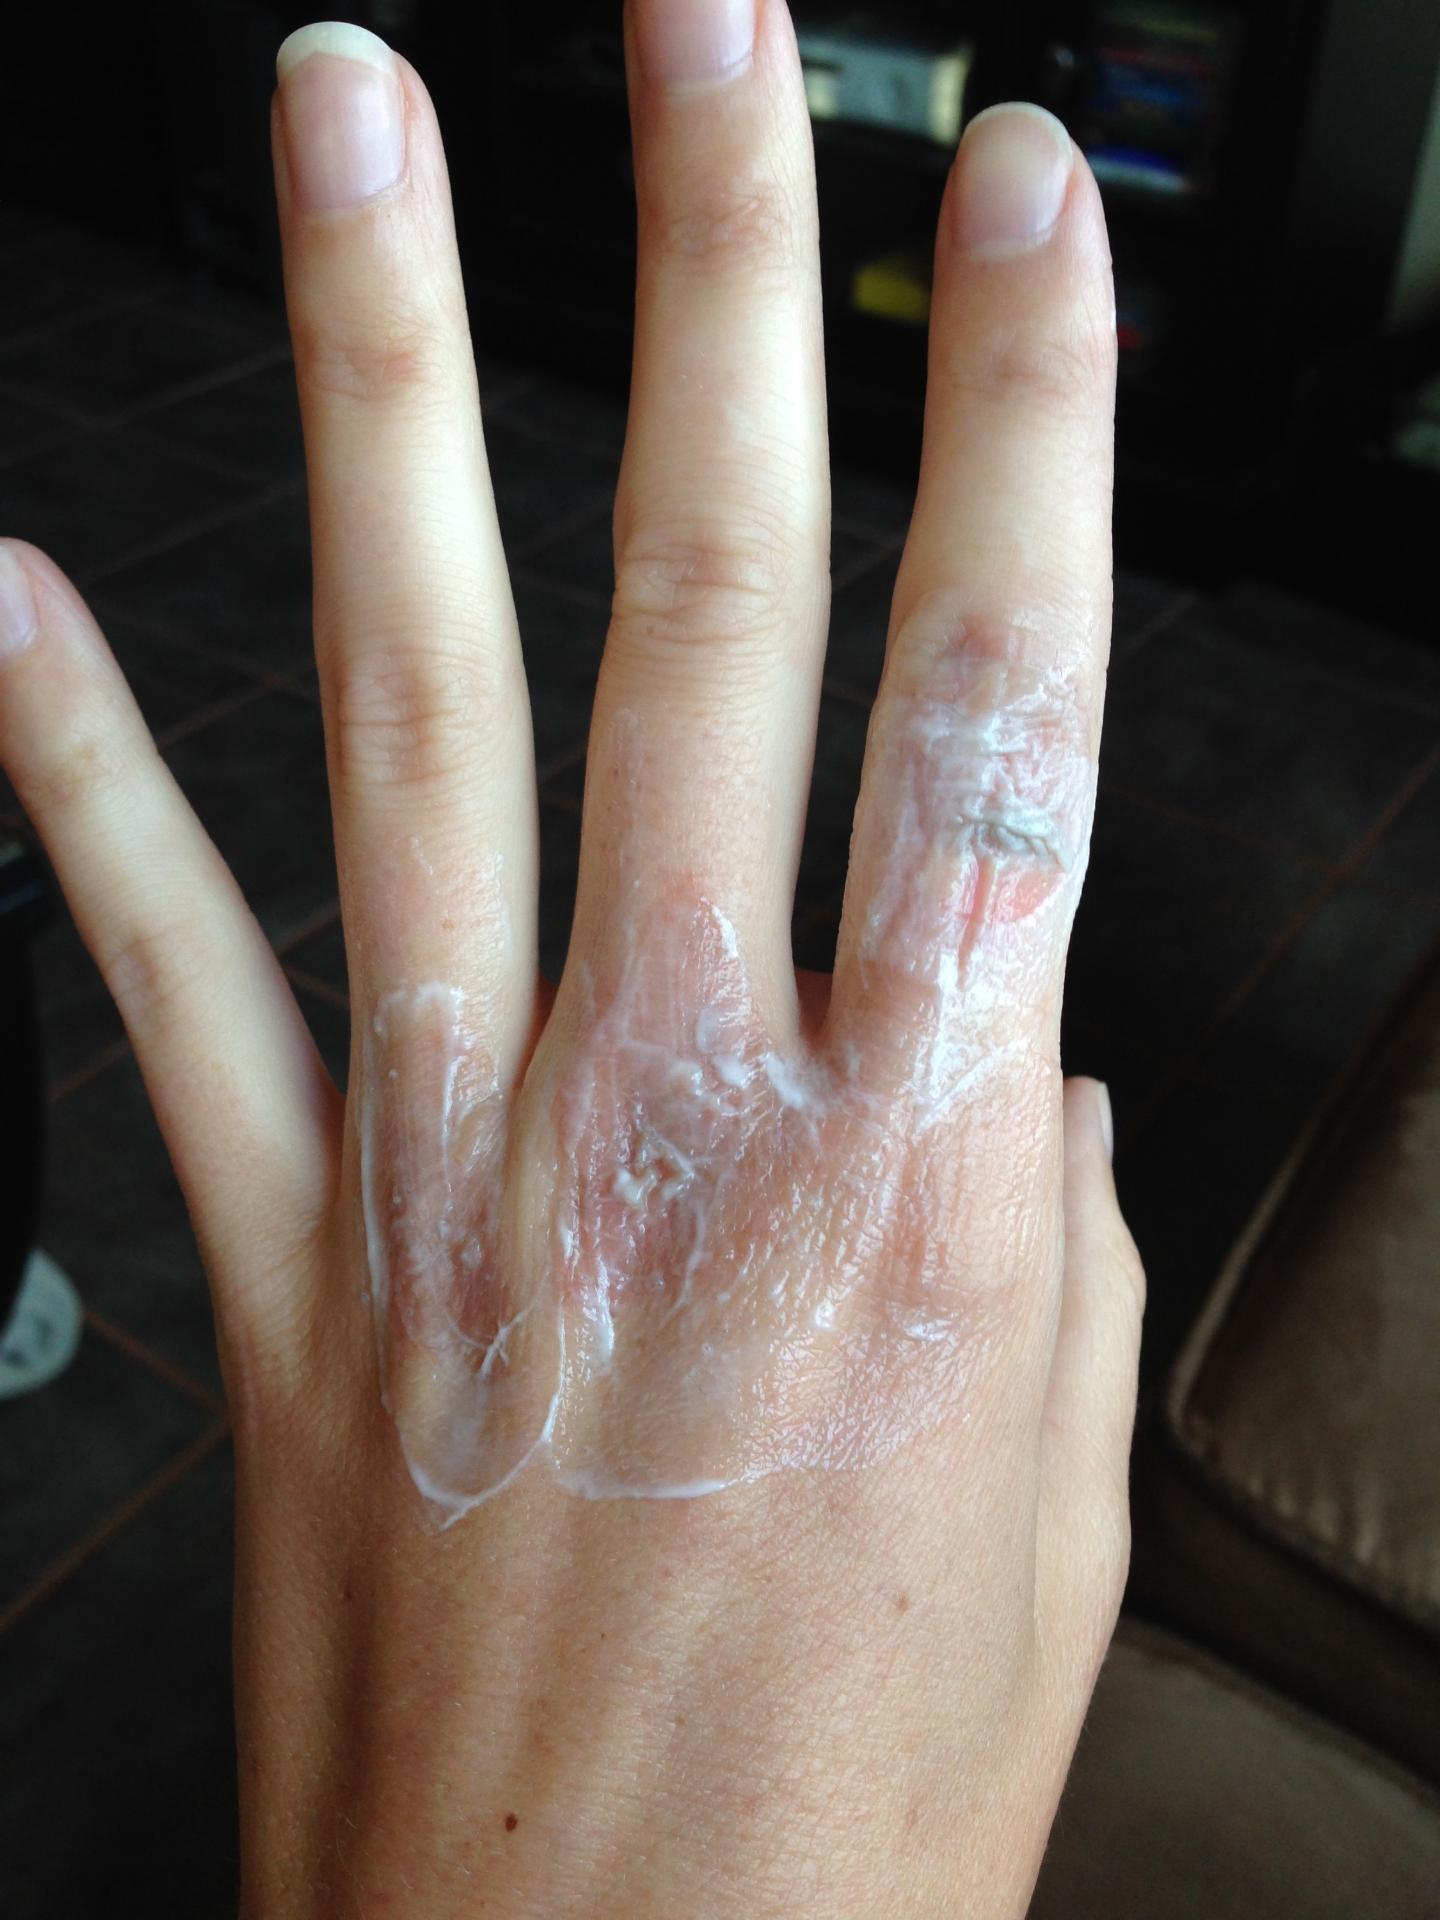 chemical burn on hands